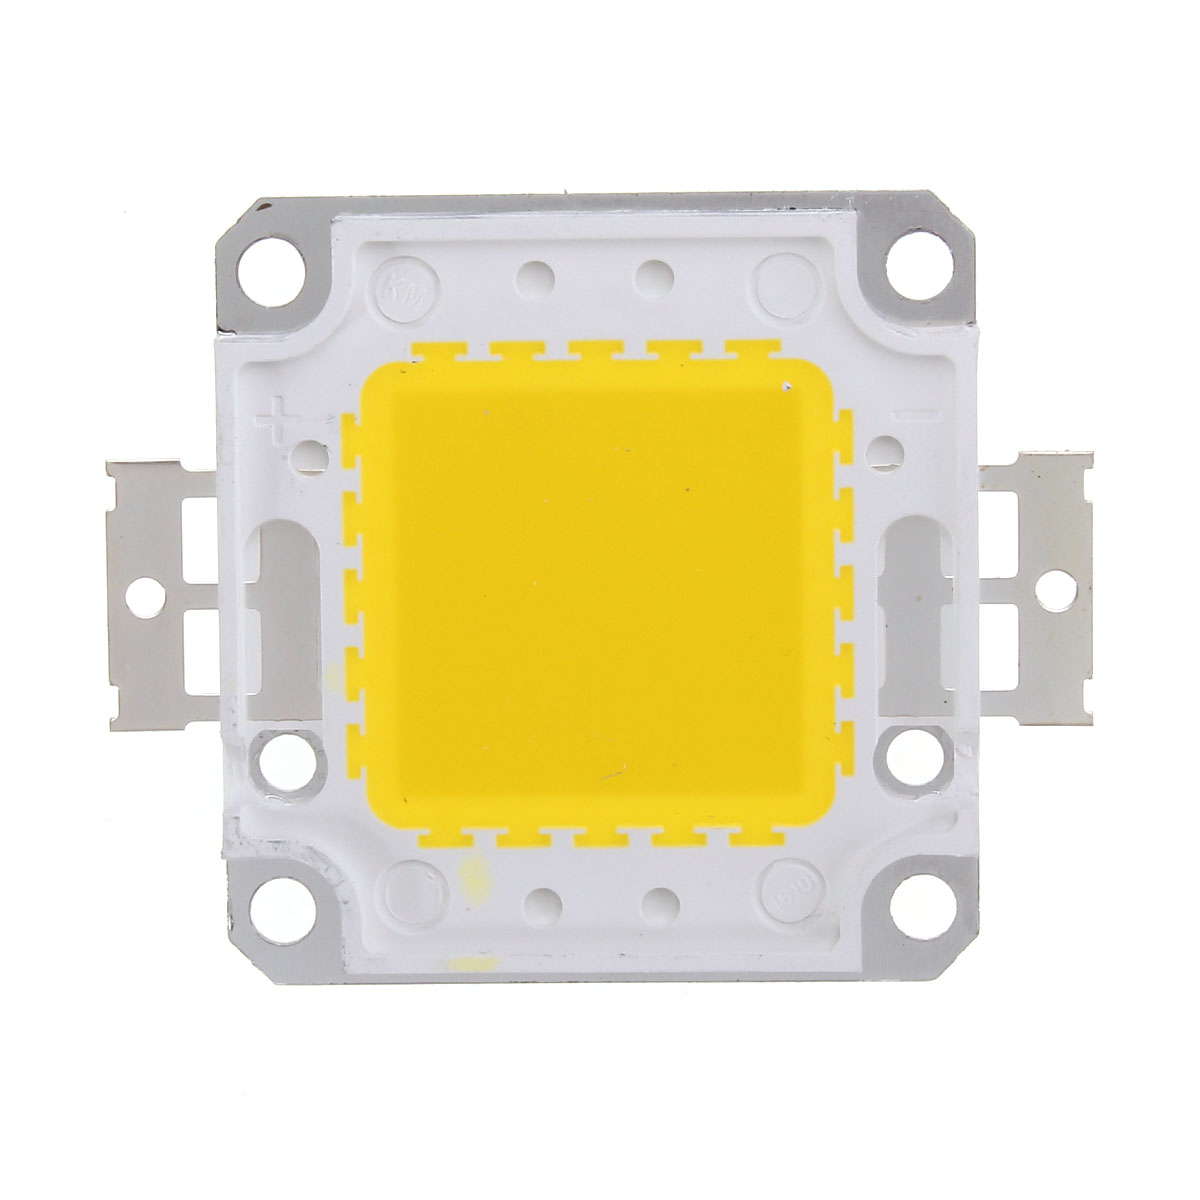 AC85-265V-45W-Waterproof-High-Power--LED-Driver-Supply-SMD-Chip-for-Flood-Light-1161102-5